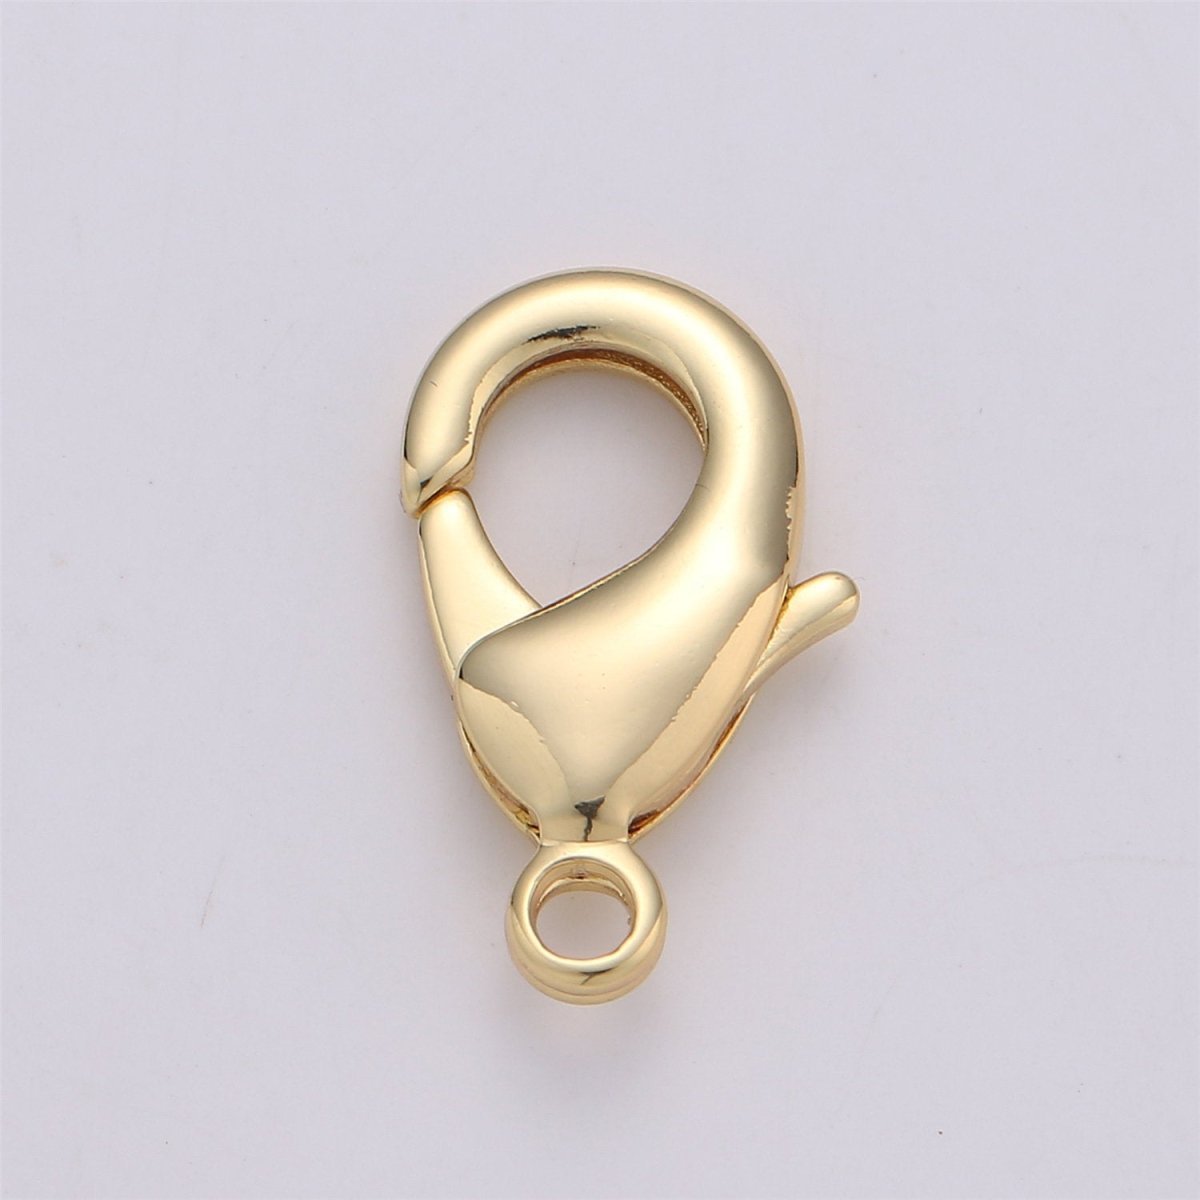 Wholesale Lobster Clasp 14K Gold Filled, Lobster Claw with Jump Ring for Jewelry Making, 17mm 23mm 27mm Closure | K-344 K-346 K-347 - DLUXCA